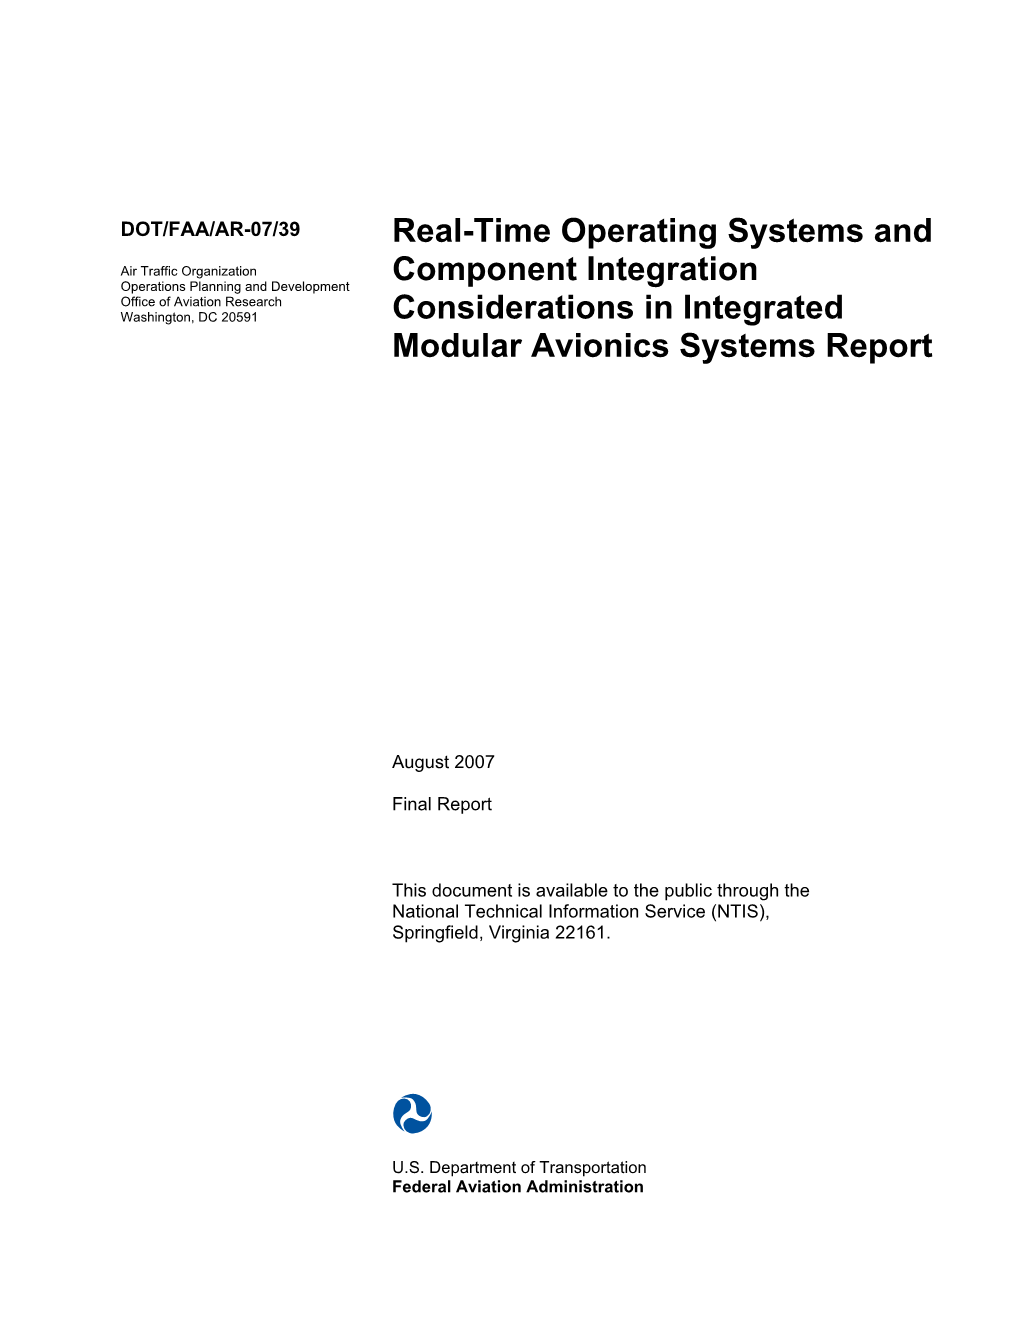 Real Time Operating Systems and Component Integration